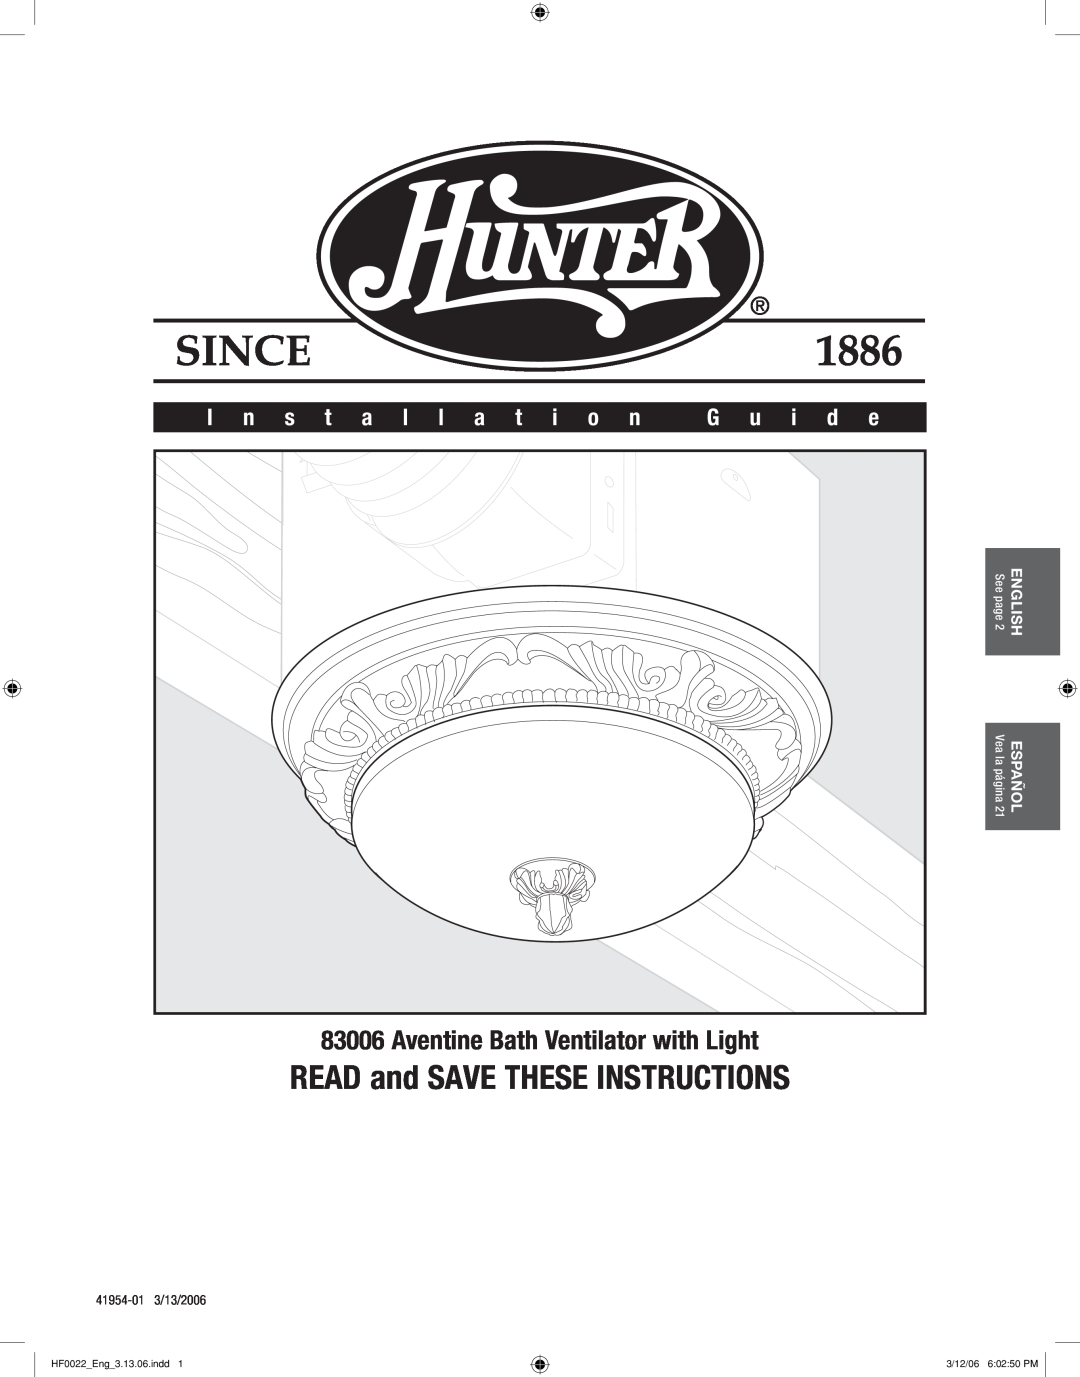 Hunter Fan 83006 manual READ and SAVE THESE INSTRUCTIONS, Aventine Bath Ventilator with Light, I n s t a l l a t i o n 